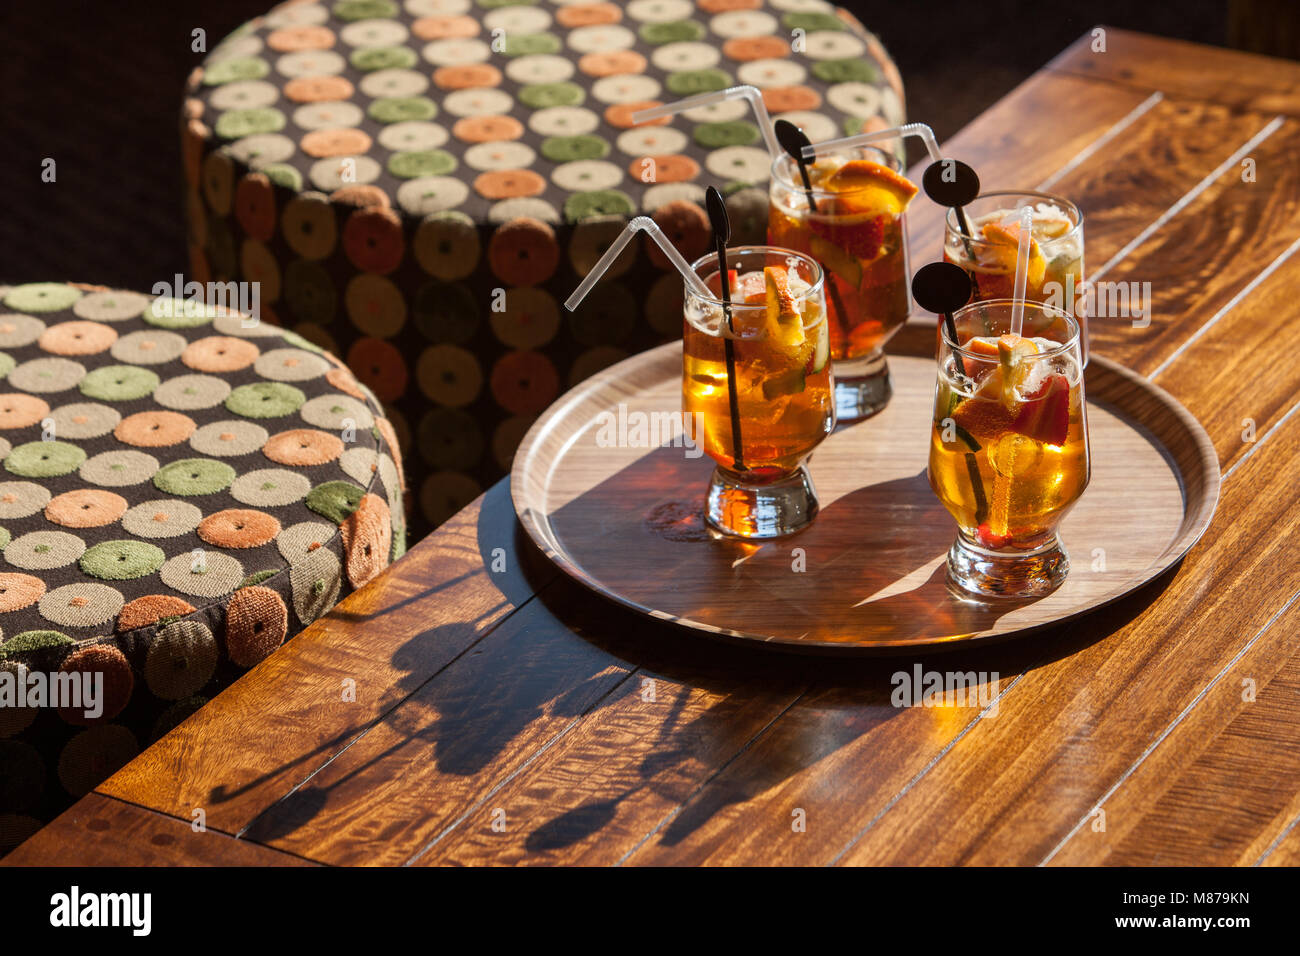 Drinks in the bar on a wooden table and bar stool Stock Photo